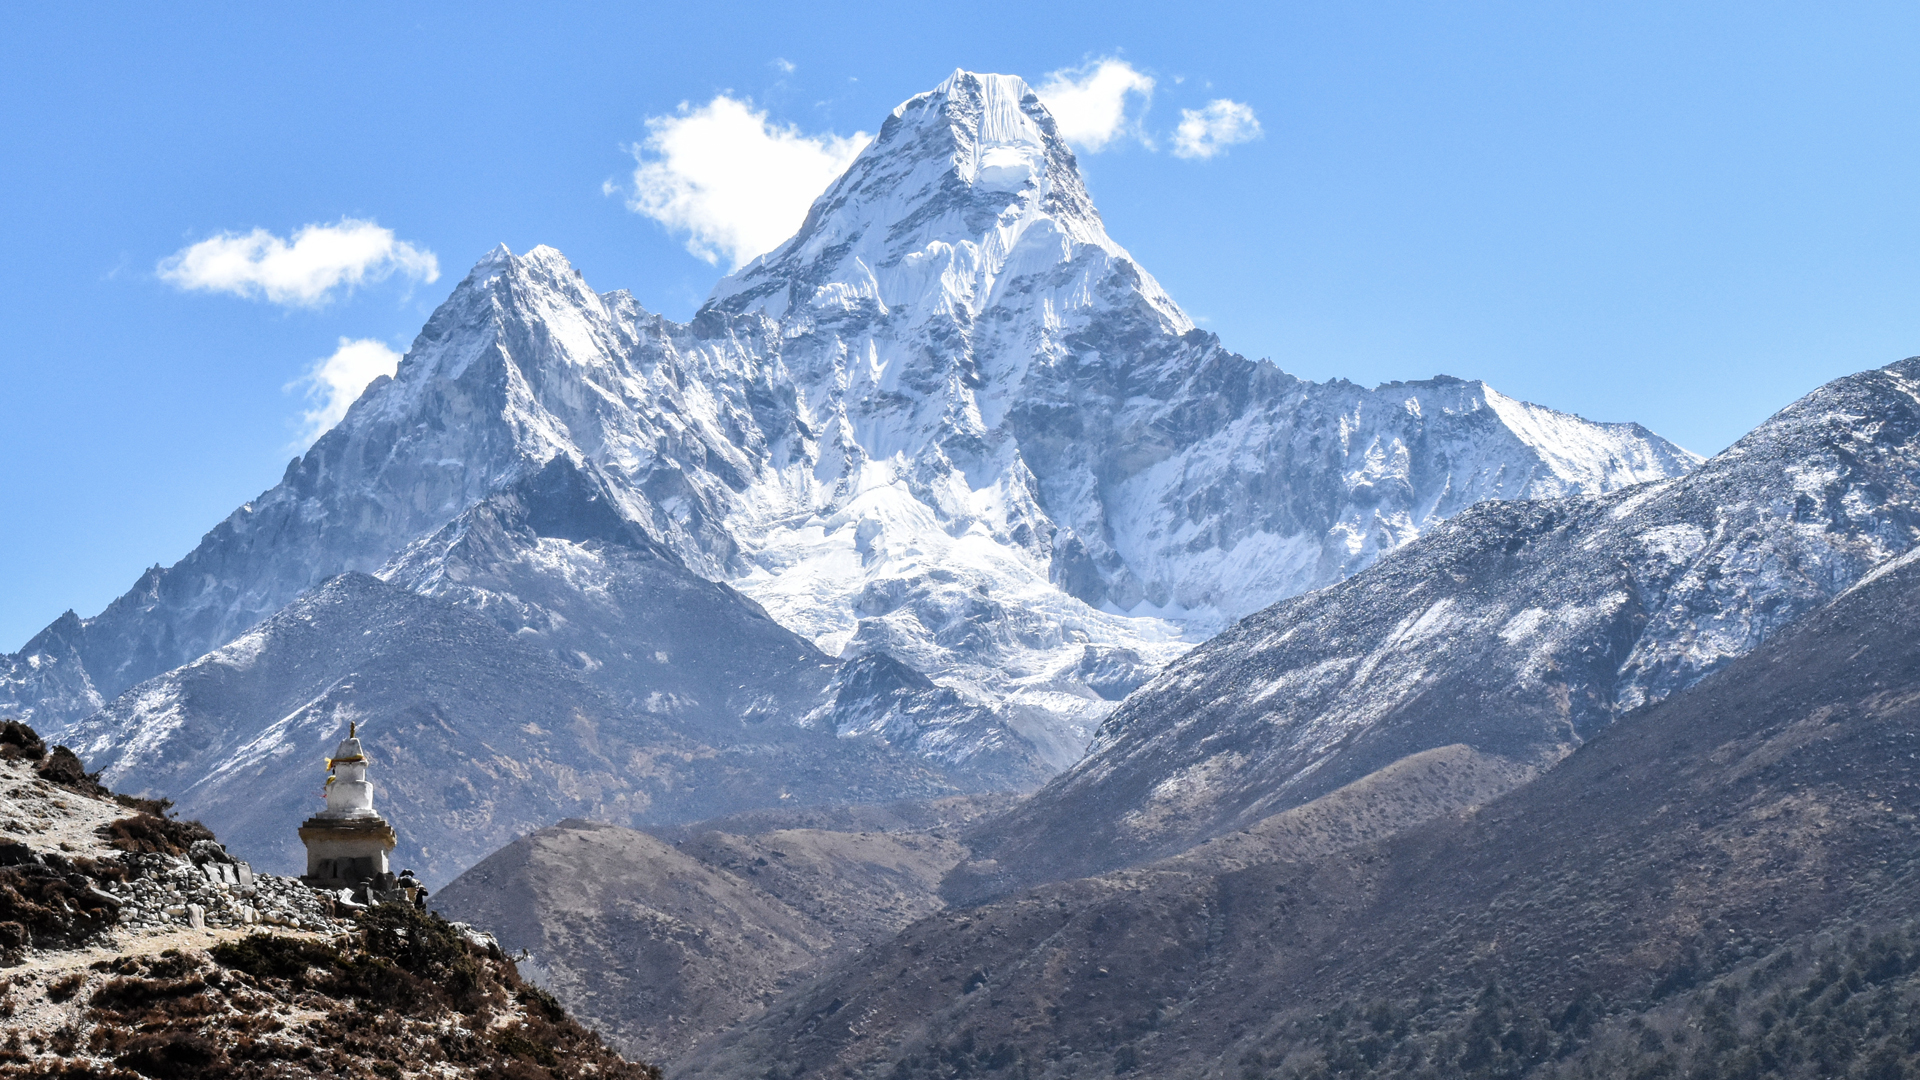 Ama Dablam Expedition. Join Full Board & Base camp Service